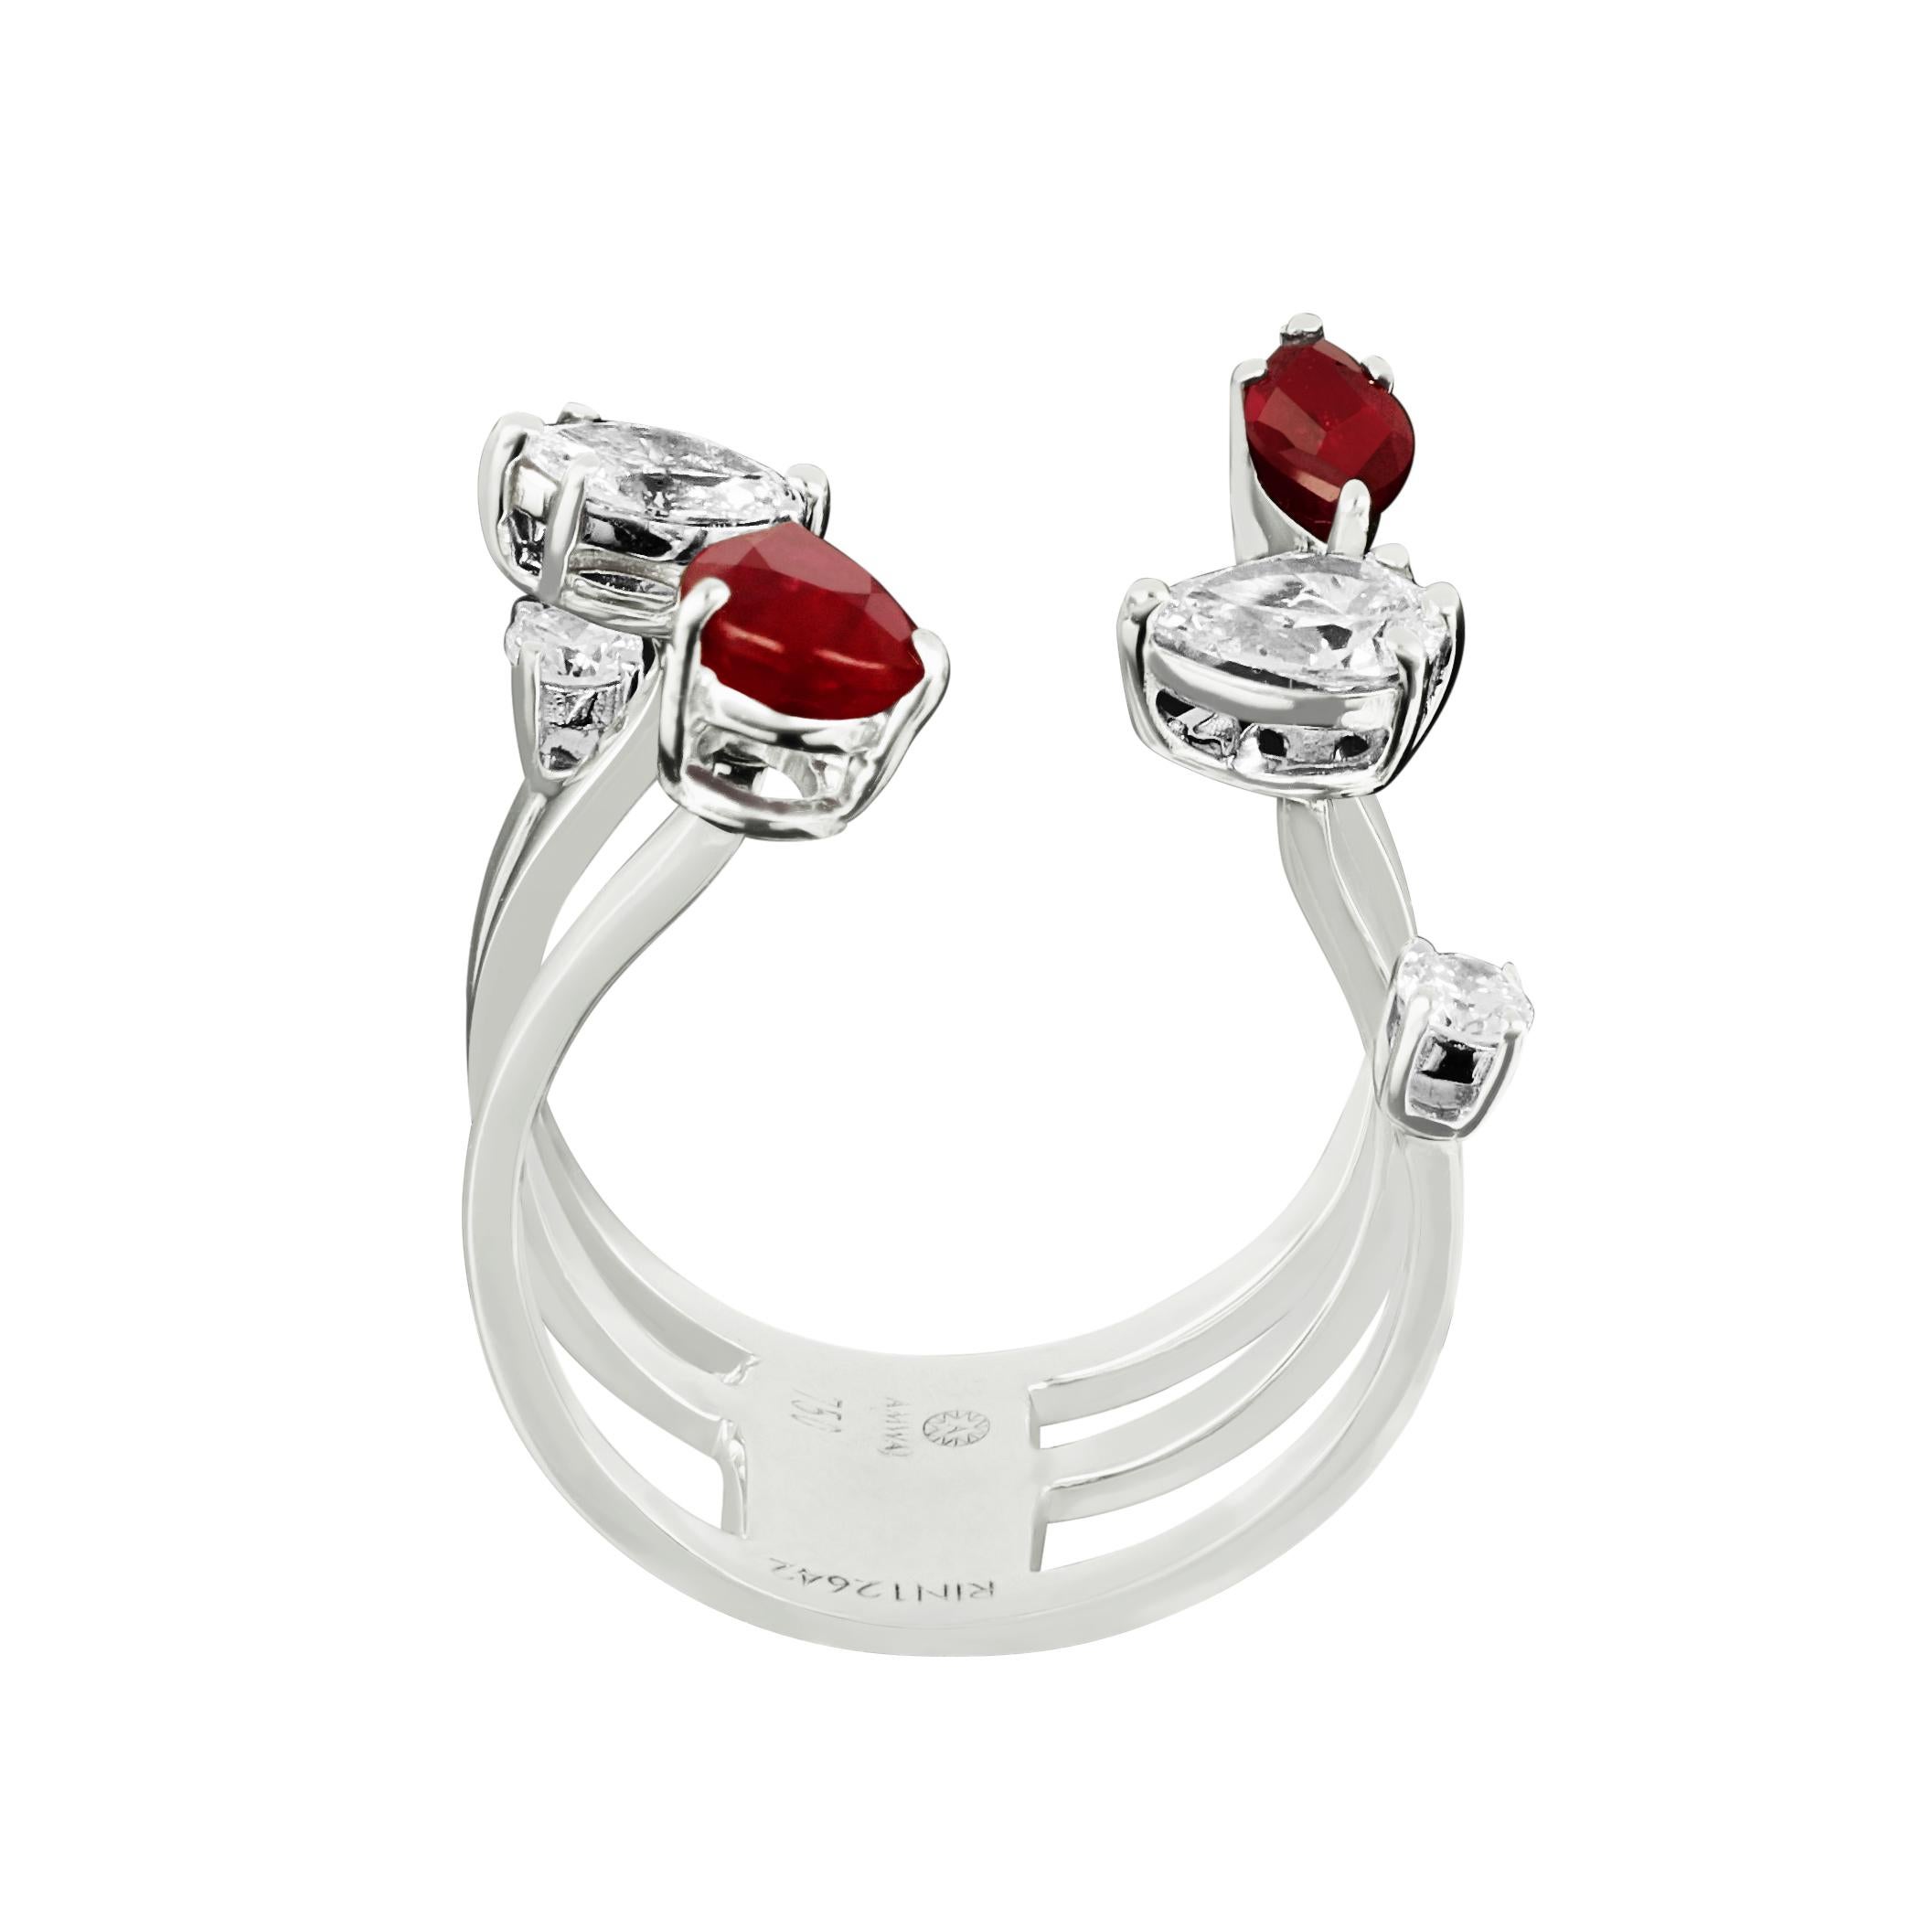 Show your love to her, the creative setting of this romantic 18 karat white gold ring by Amwaj jewellery leads the eye to a carat ruby. The shade of red is intensified by its sleek pear and marquise cut, which draws the eye into its profound depth